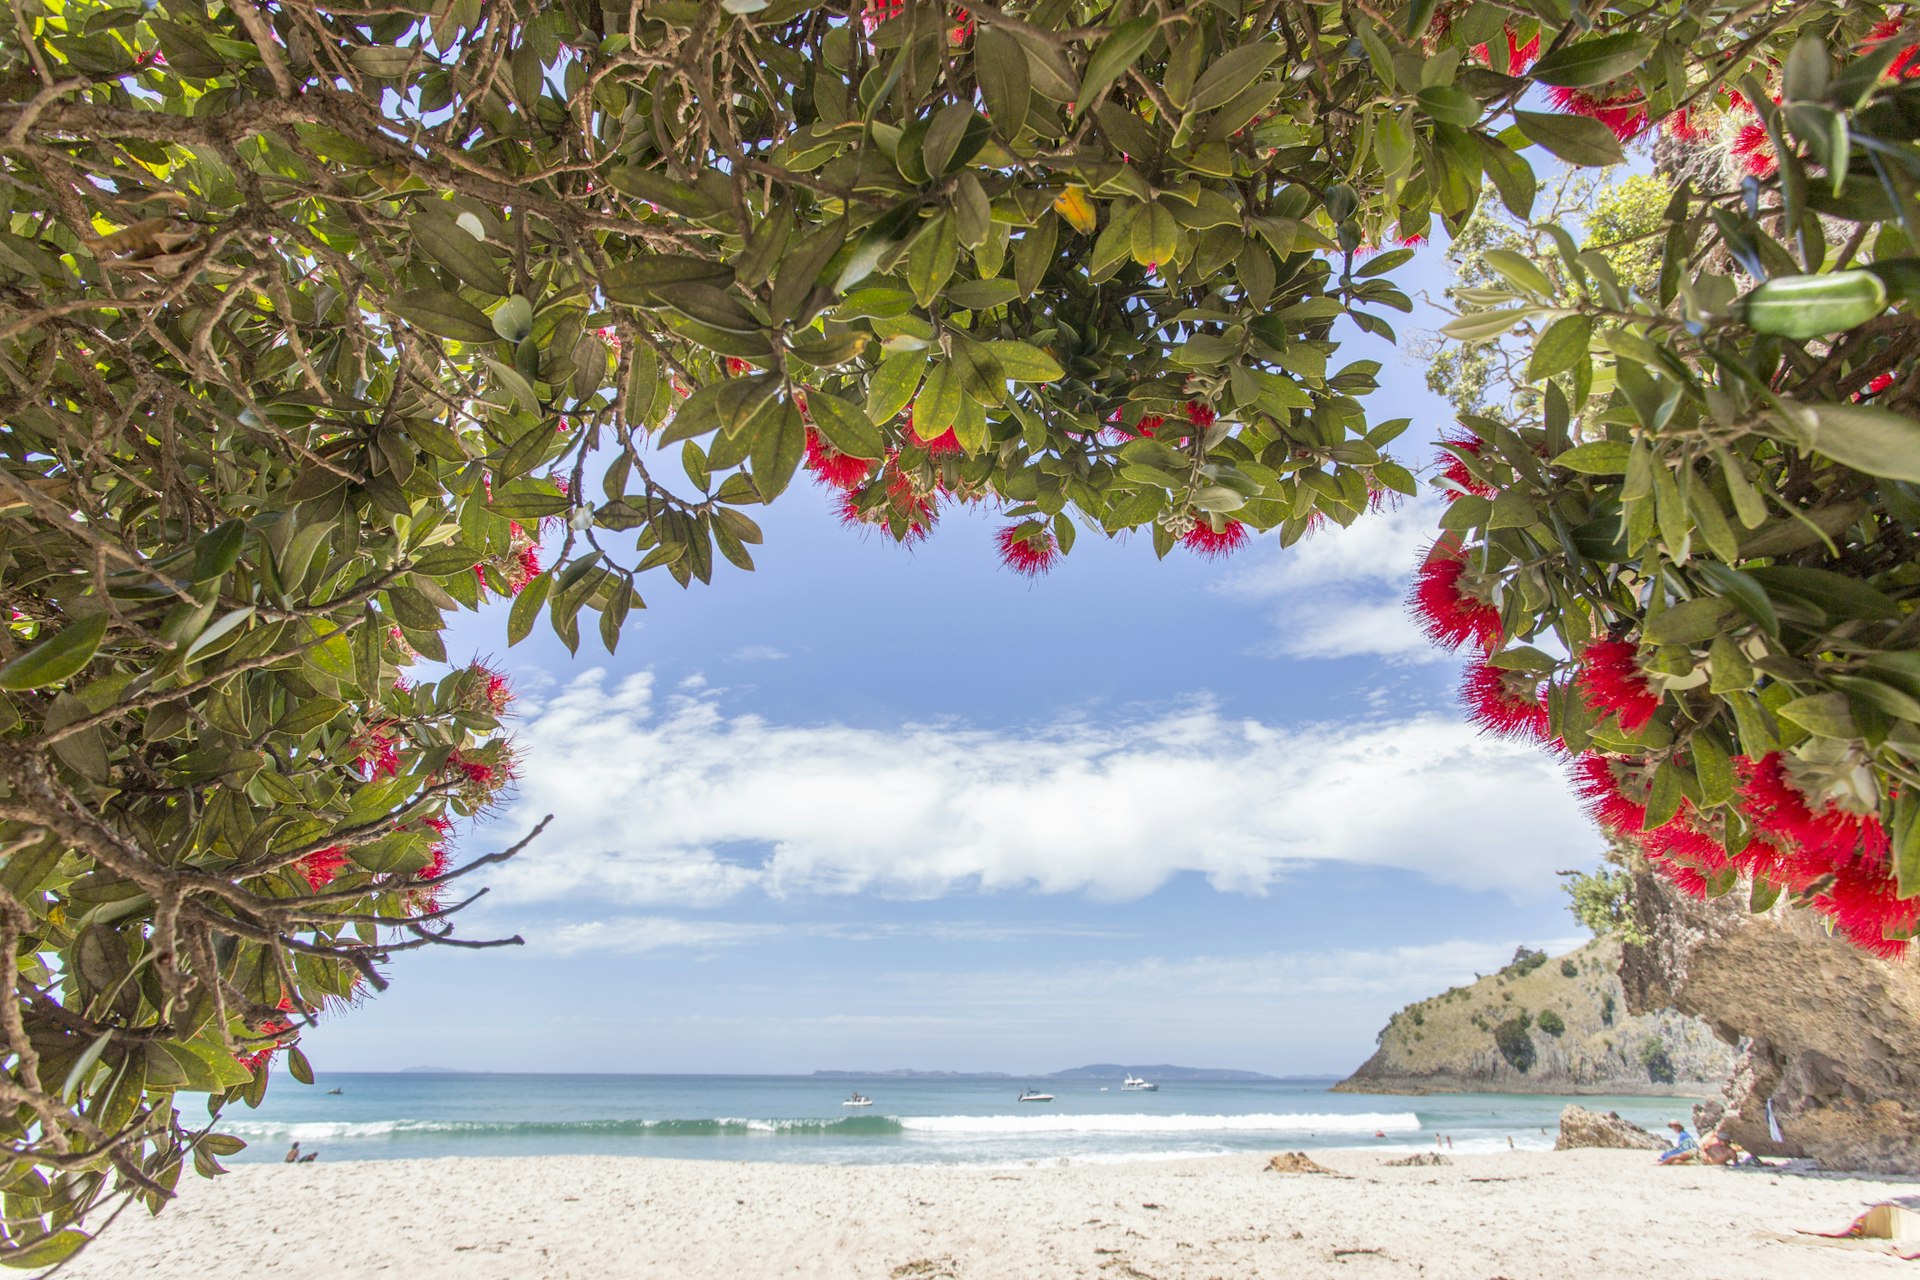 A view of a lovely sandy beach seen through red flowers